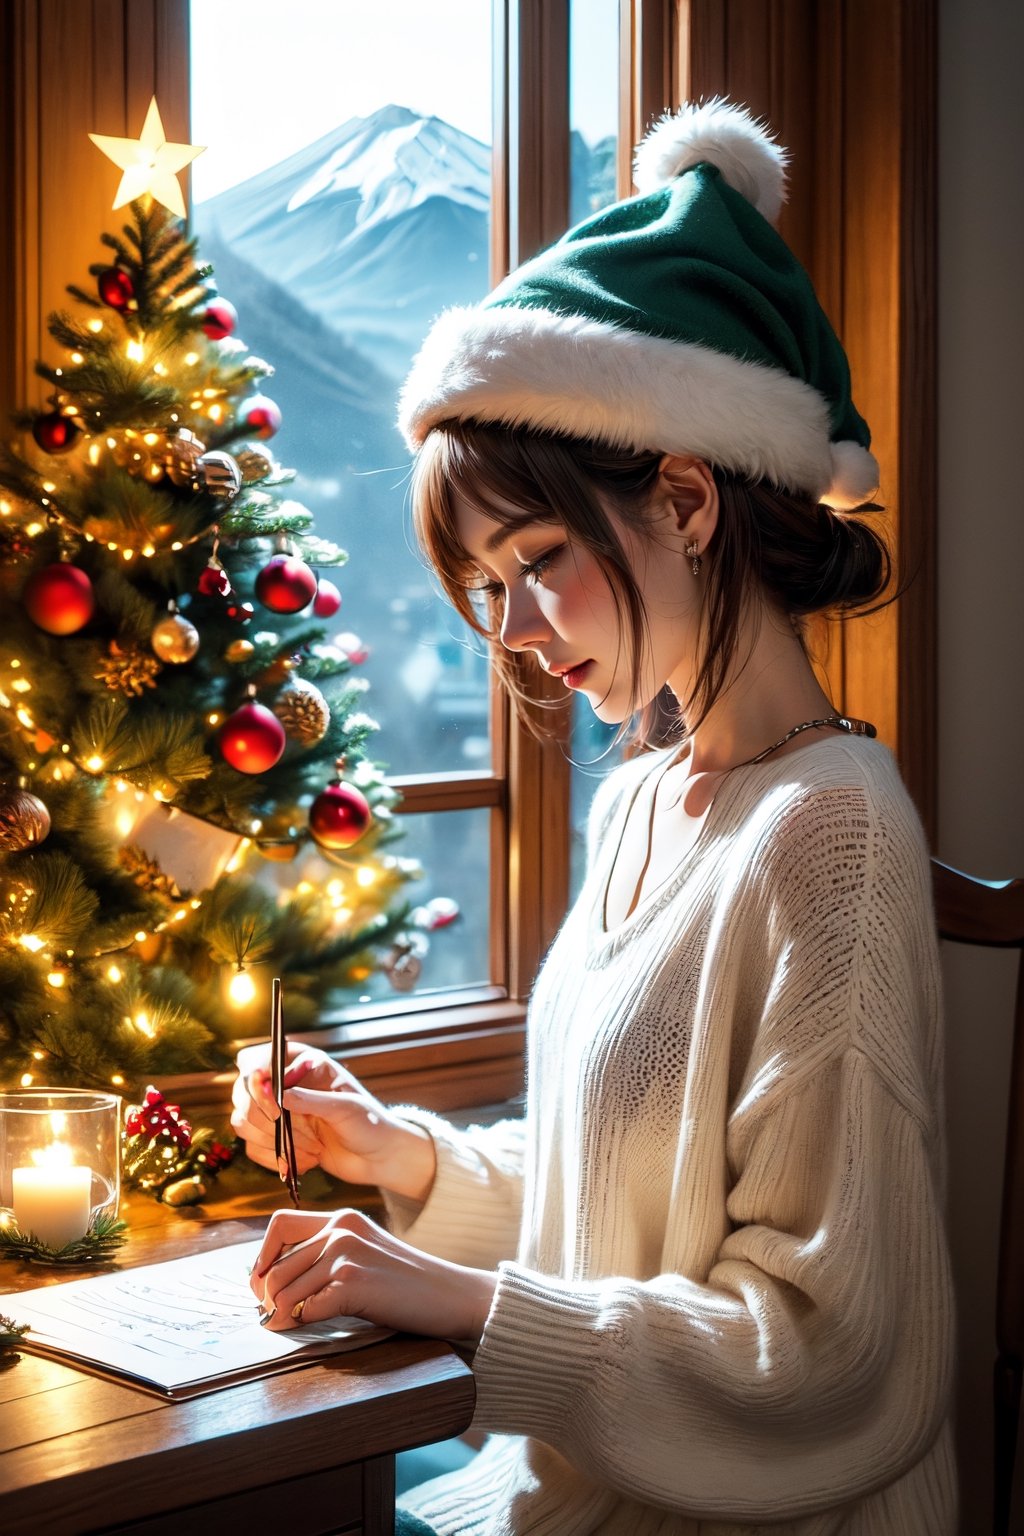 girl like to nicole kidman in a Christmas atmosphere, studying by a window in the early morning,  She is shown in profile, looking down at her homework with her right hand writing. She's wearing  a Christmas hat, immersed in her music. Beside her is a Japanese Maneki-neko (lucky cat) with its left paw raised. The room has a cozy, festive ambiance. Outside the window, there's a view of Mount Fuji, a cluster of small houses, and numerous Christmas trees, capturing the essence of a Christmas morning. The image is ideal for a LOFI music background, ,Lofi style